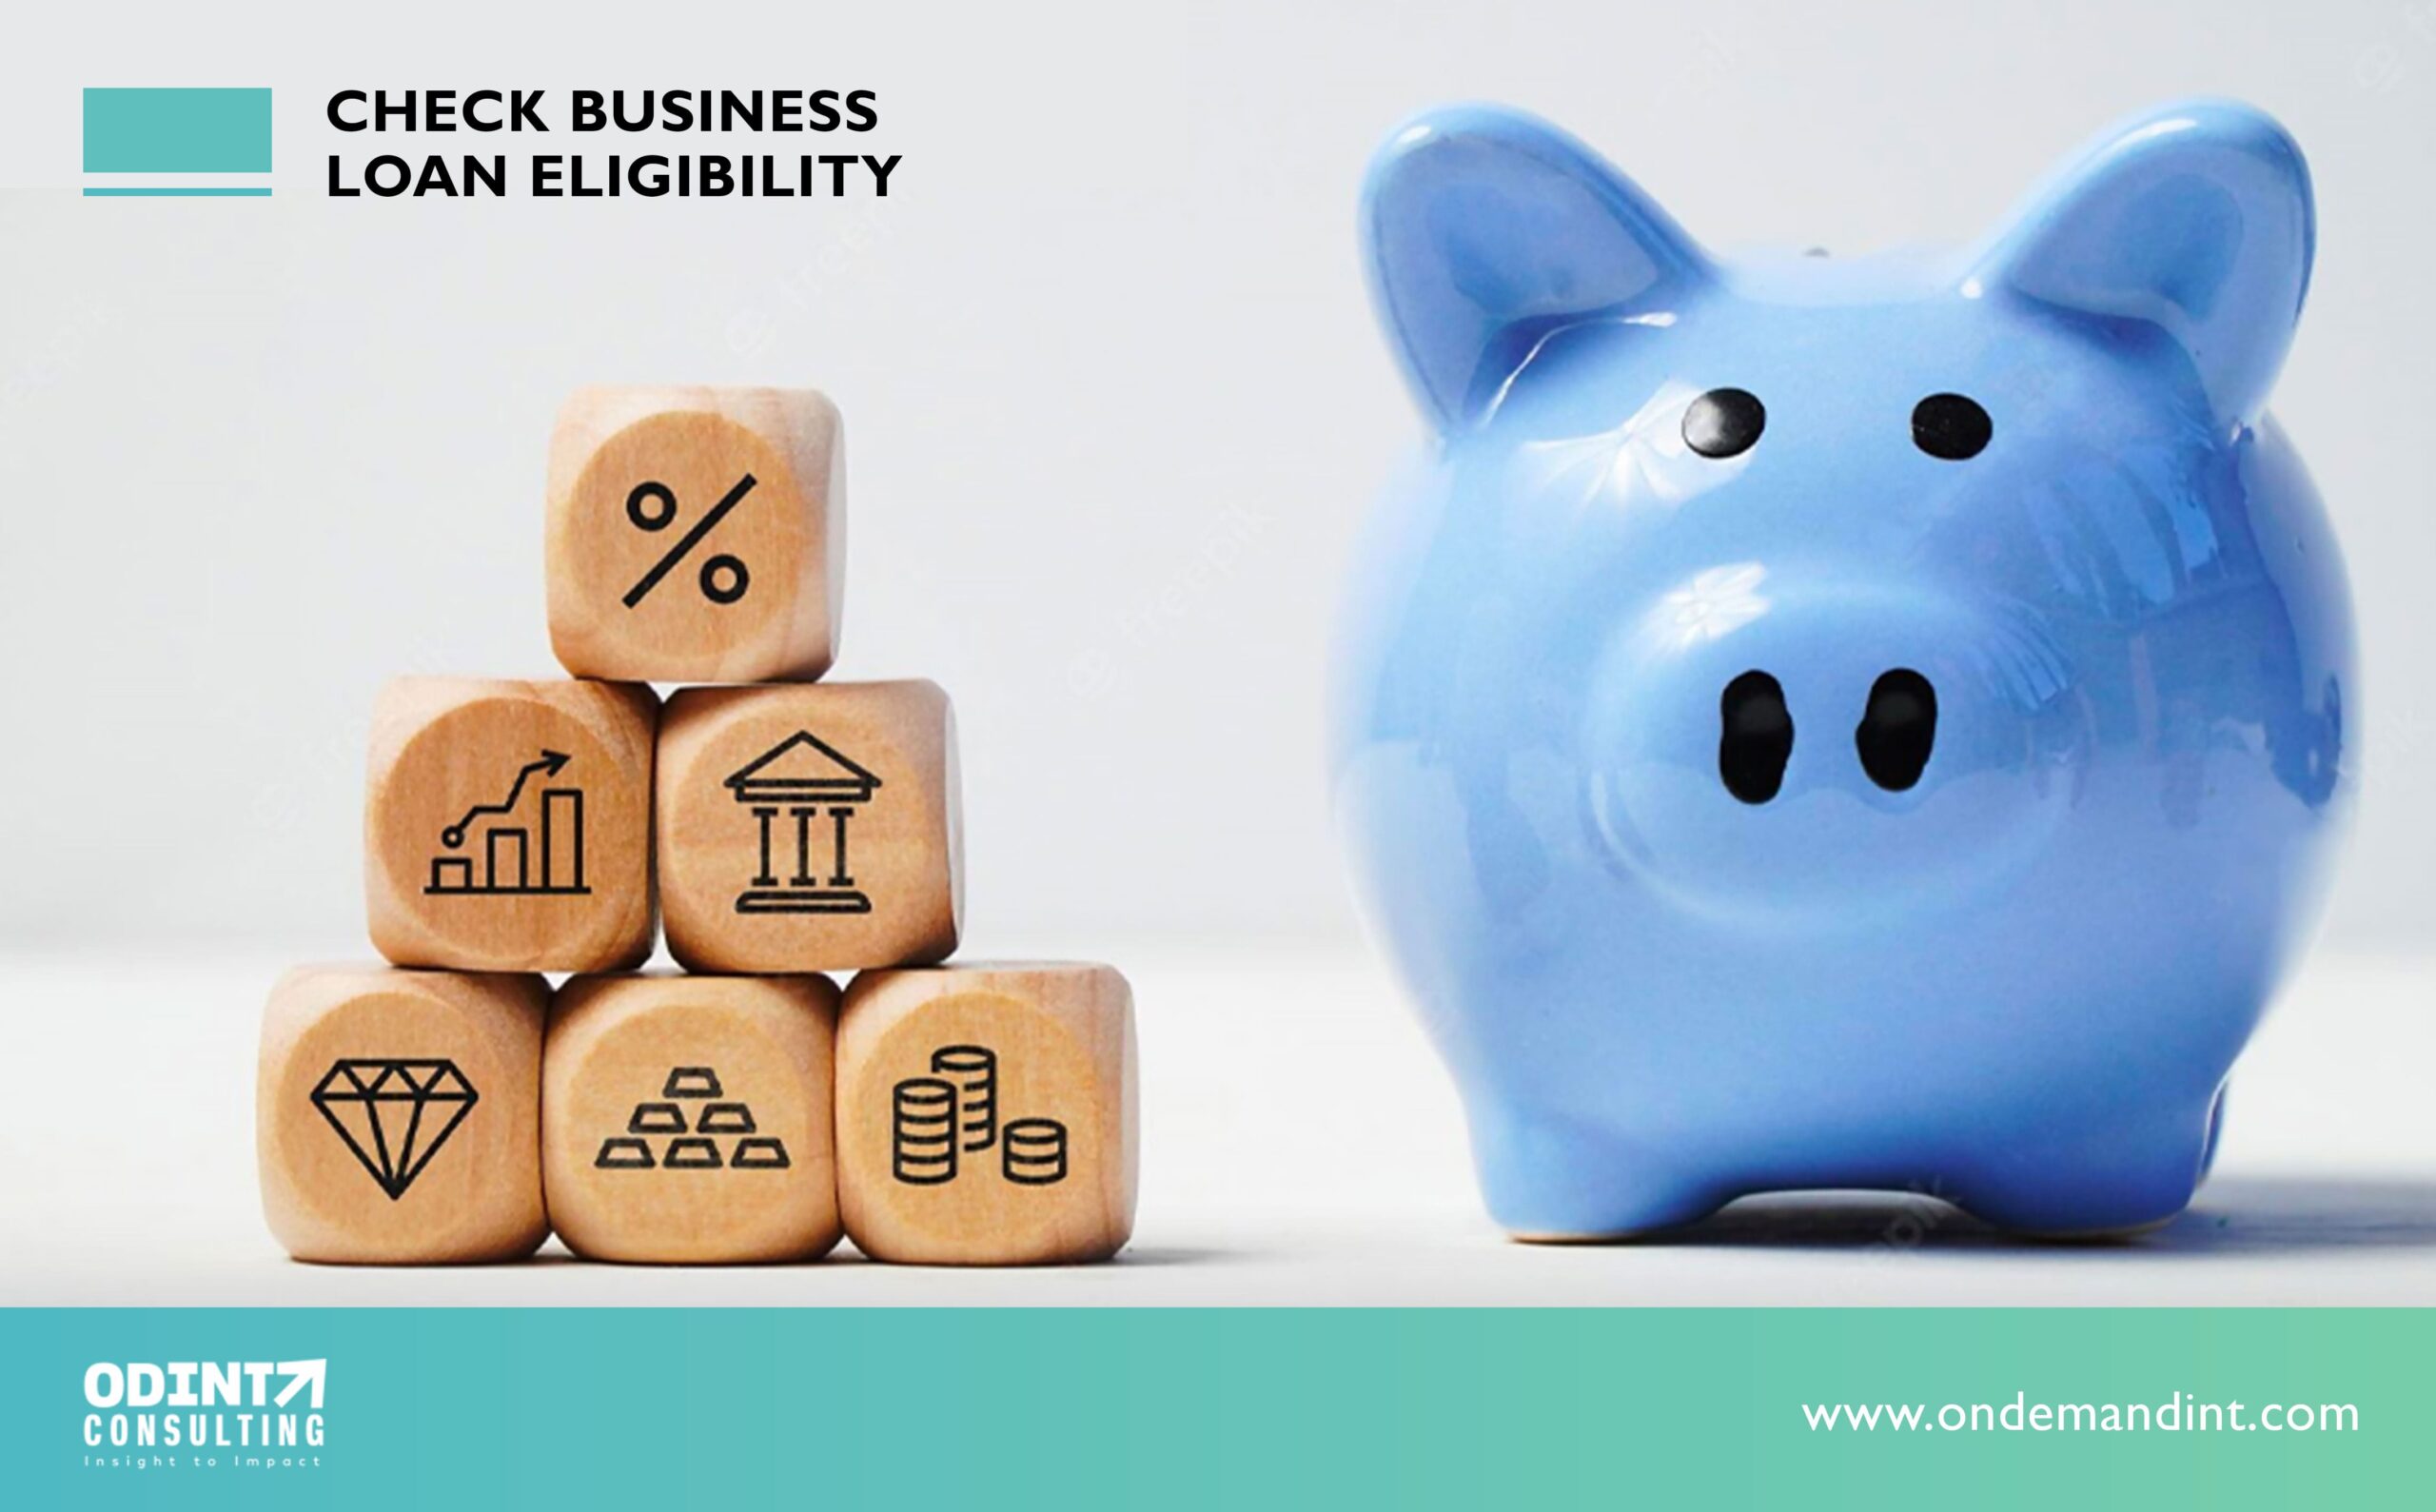 Check Business Loan Eligibility for 4 Kinds of Loans: Benefits, Purpose & Requirements